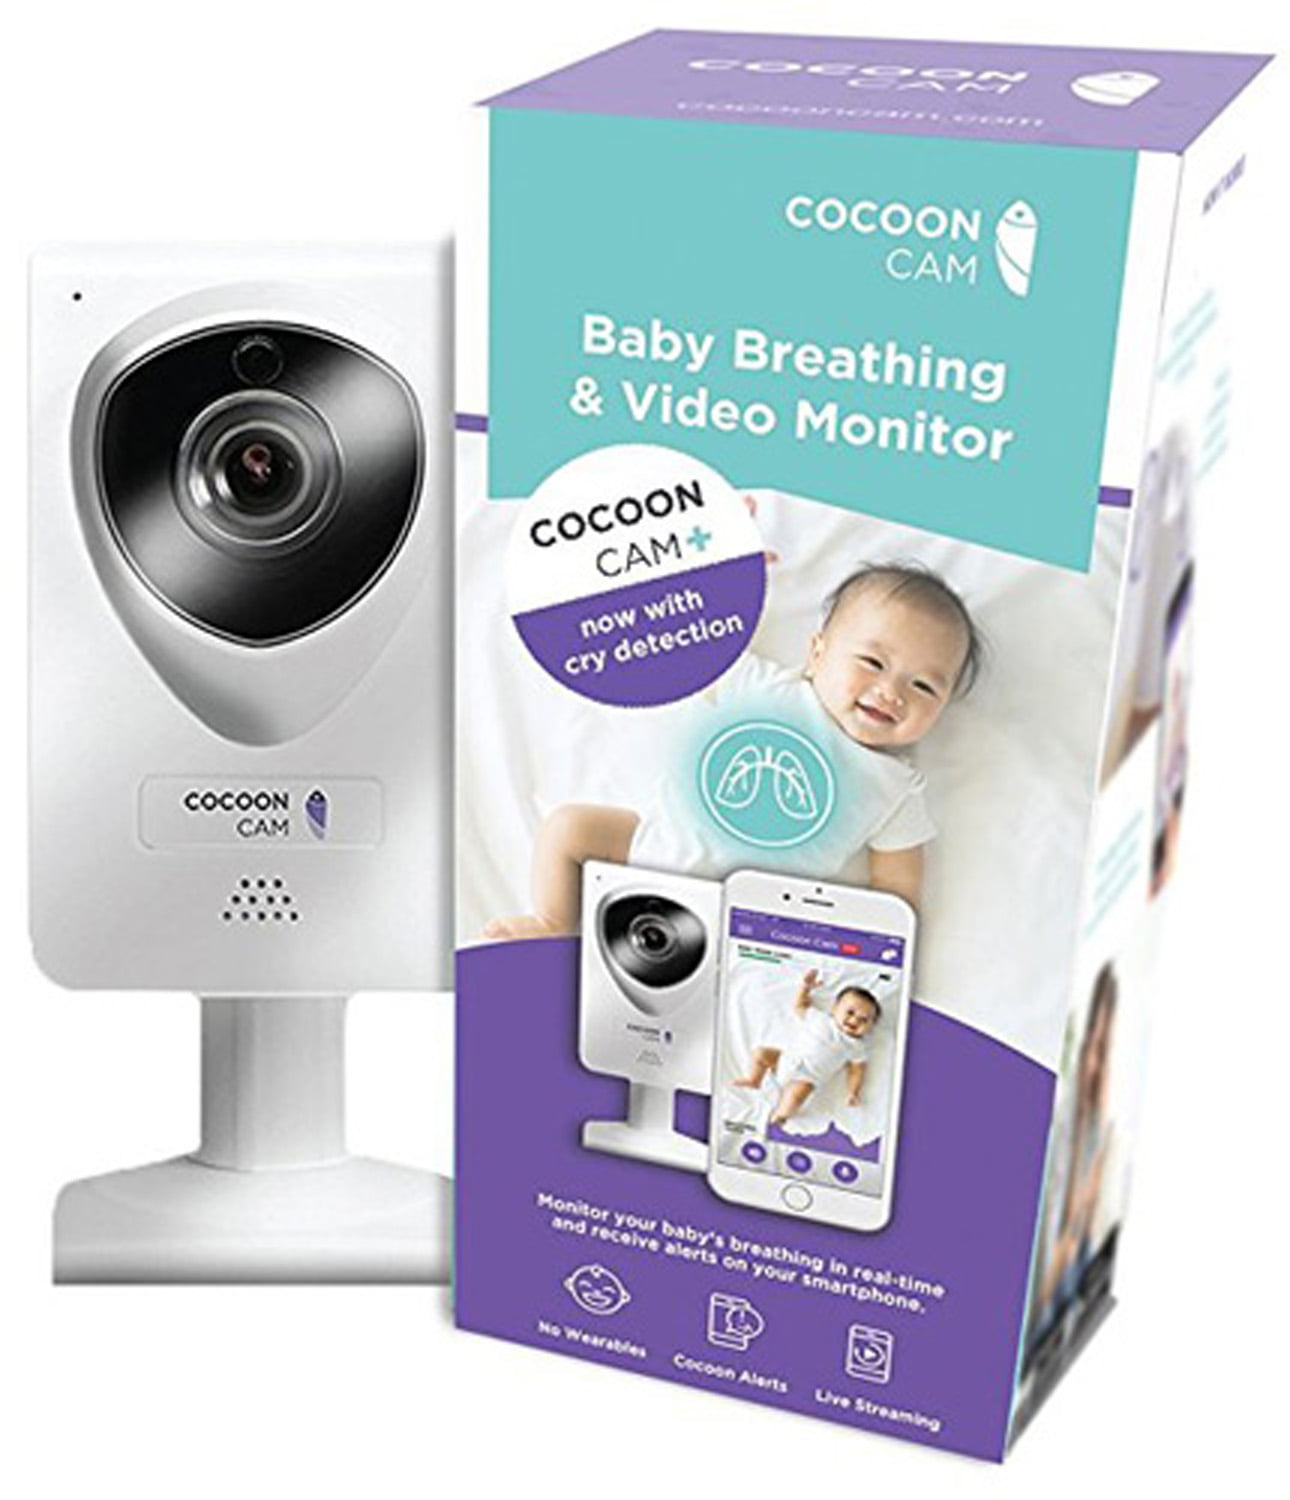 HD VIDEO & 2-WAY AUDIO MONITOR PLUS REAL-TIME BREATHING VVV 323 COCOON CAM 